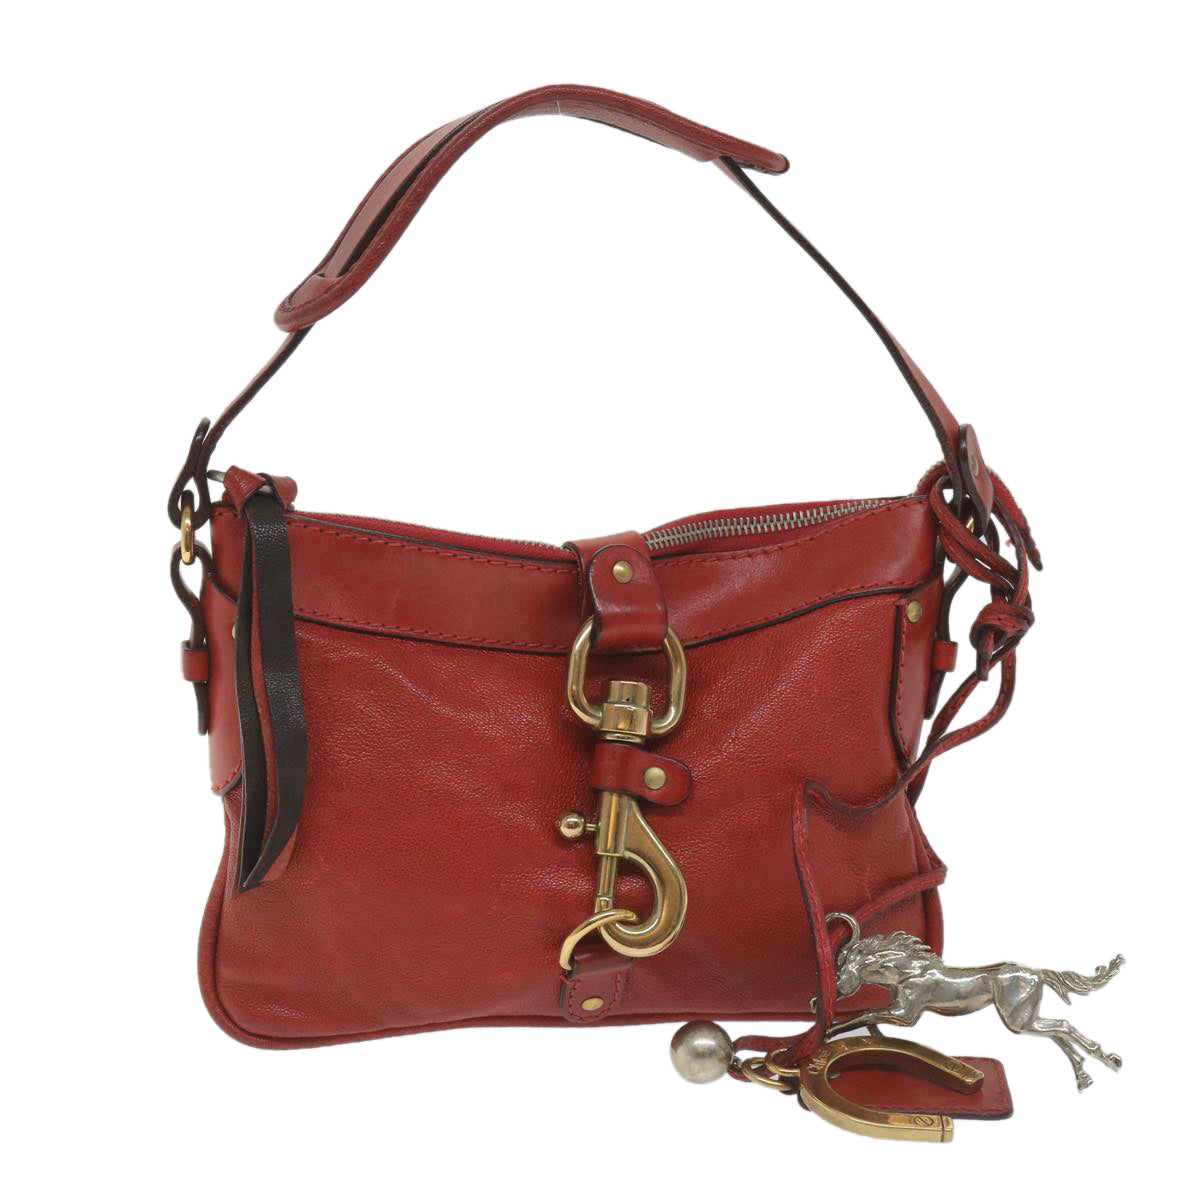 Chloe Shoulder Bag Leather Red 03 08 51 5811 Auth yk9240